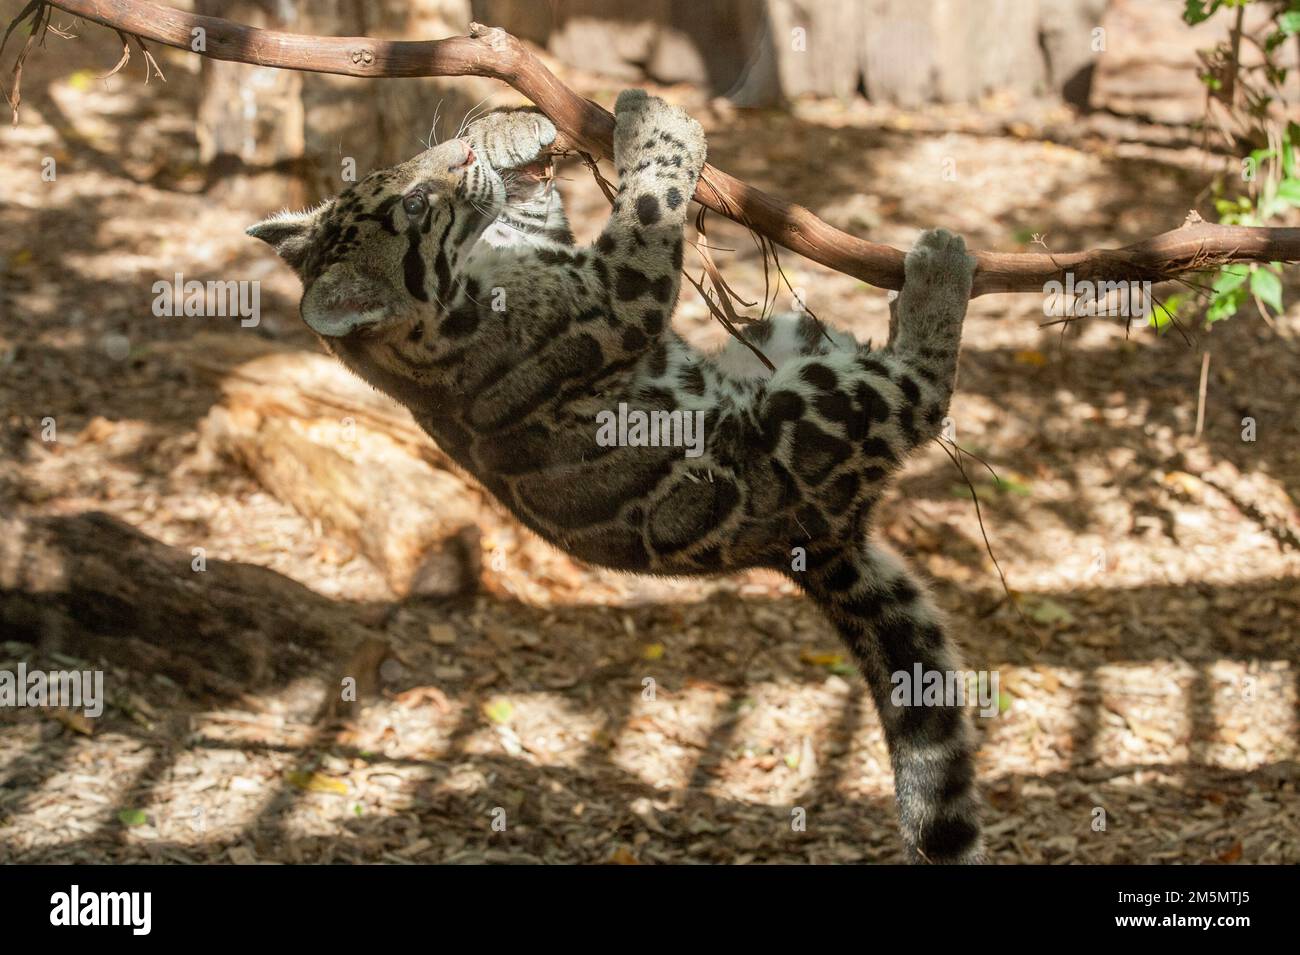 A clouded leopard (Neofelis nebulosa) cub about four months old, playing in its pen at the Nashville, Tennessee Zoo. Stock Photo